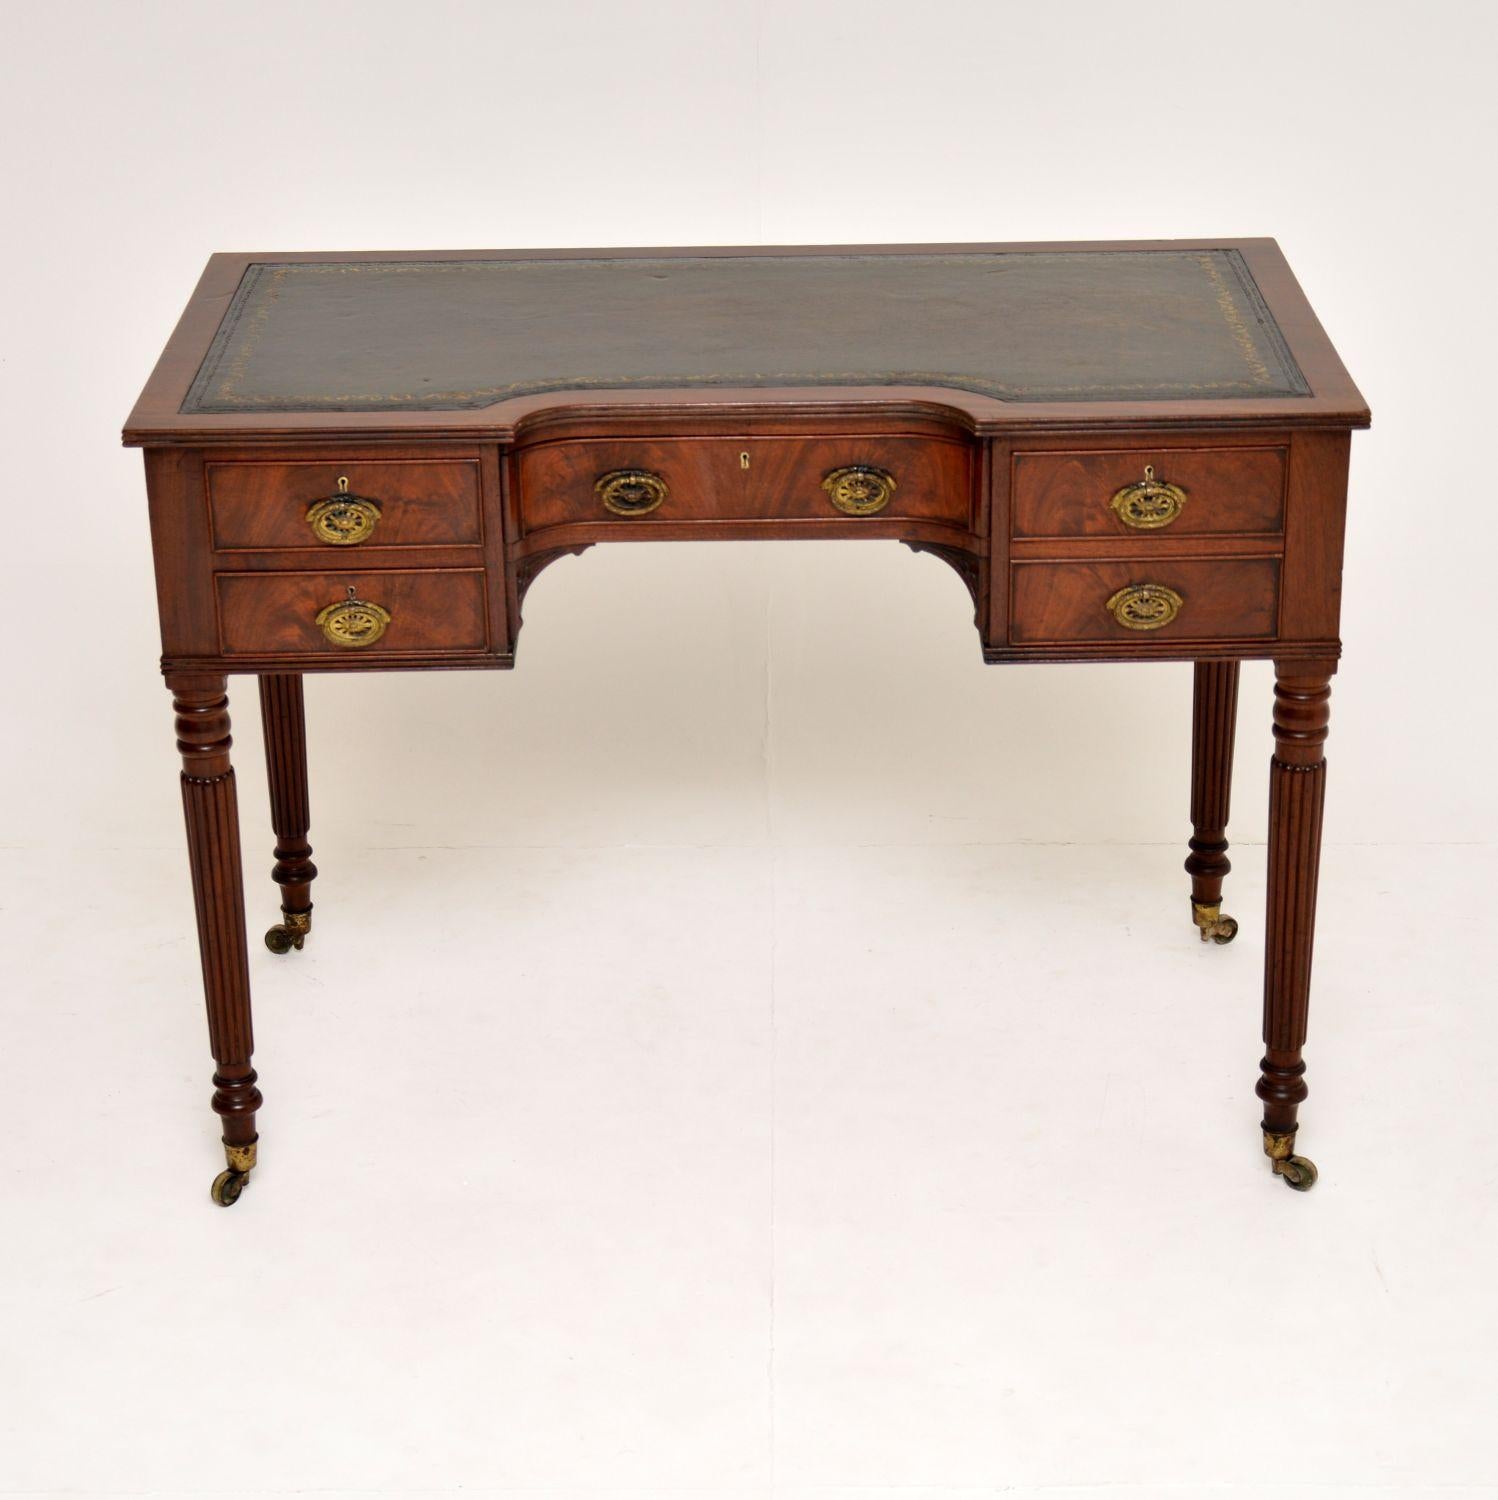 This antique mahogany George IV desk dating from the 1820s-1830s period, is fabulous quality, with some fine details and is in great condition.

It has a tooled leather writing surface, with a reeded top and bottom edge. All the drawers have